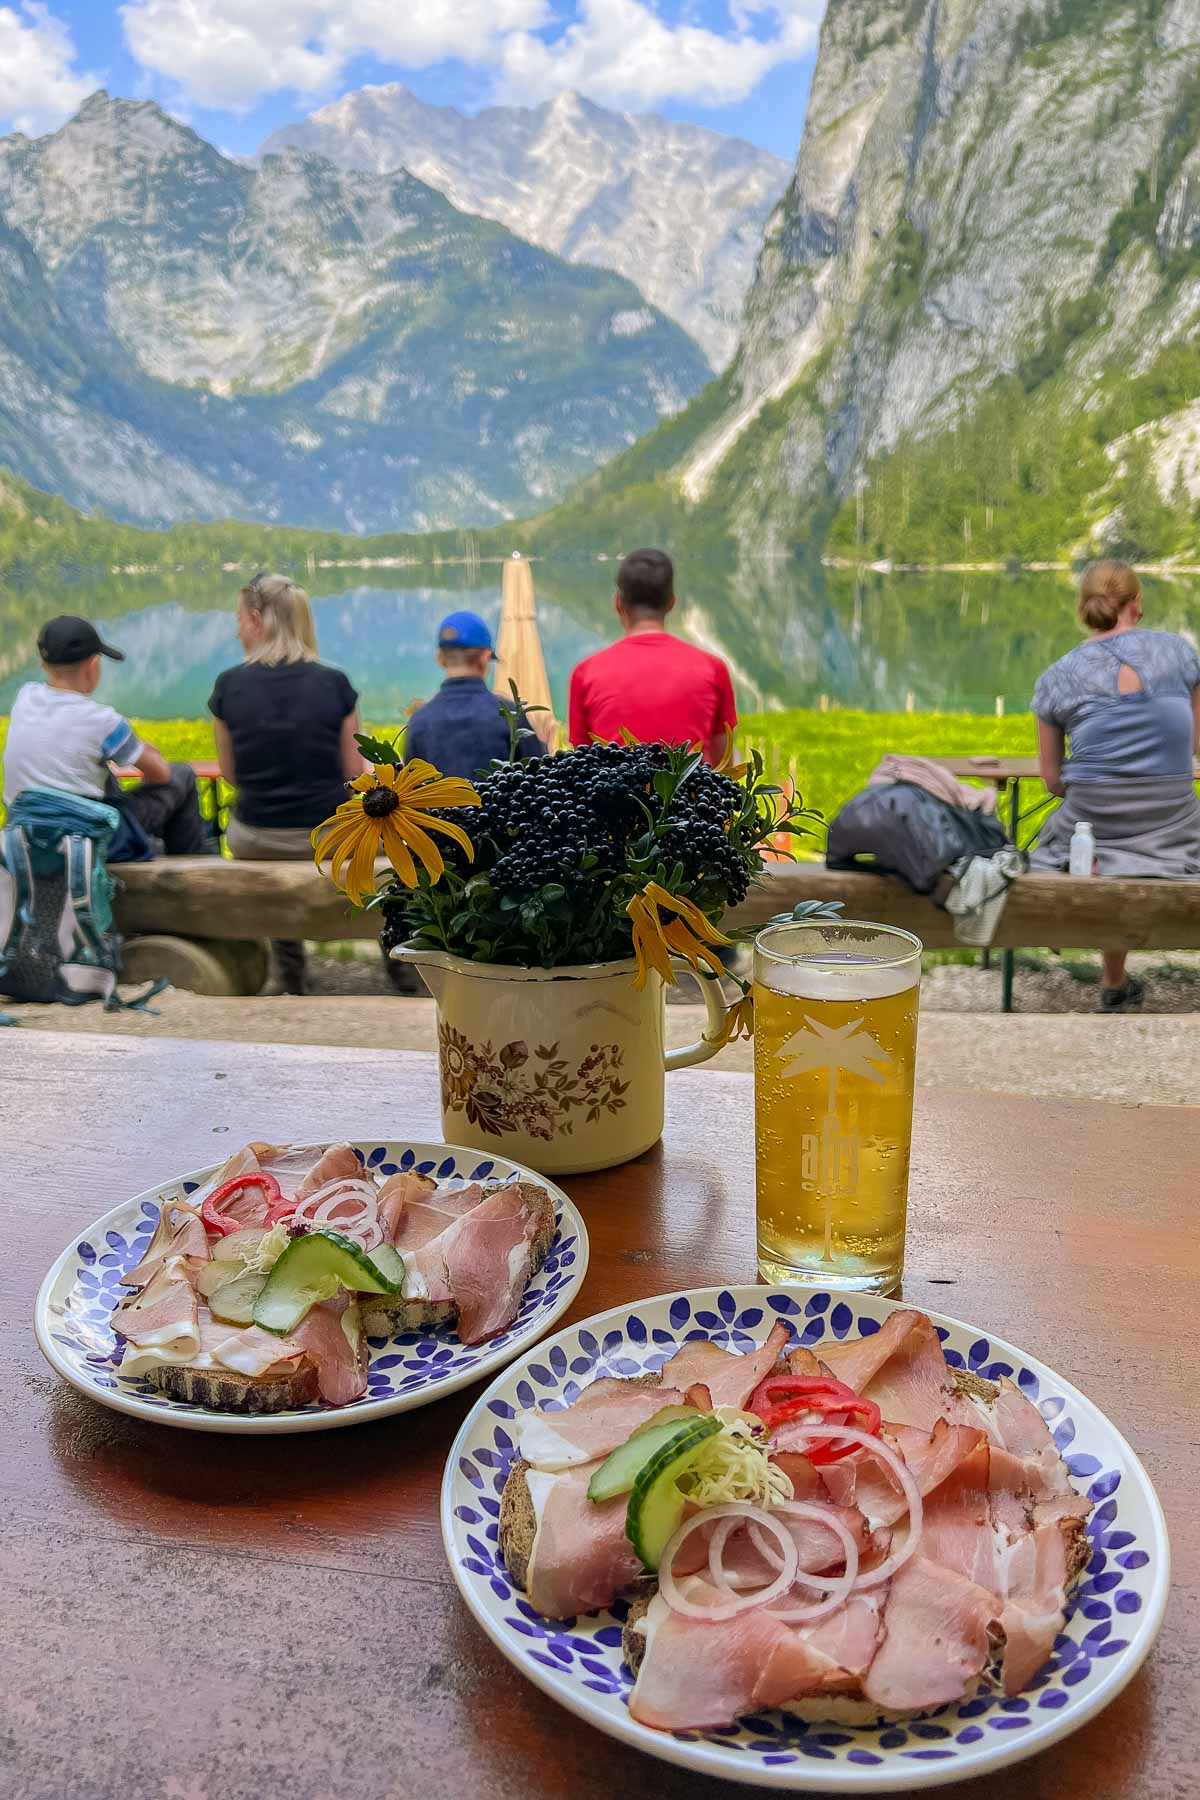 Breakfast at Fischunkelalm at Lake Obersee, Germany